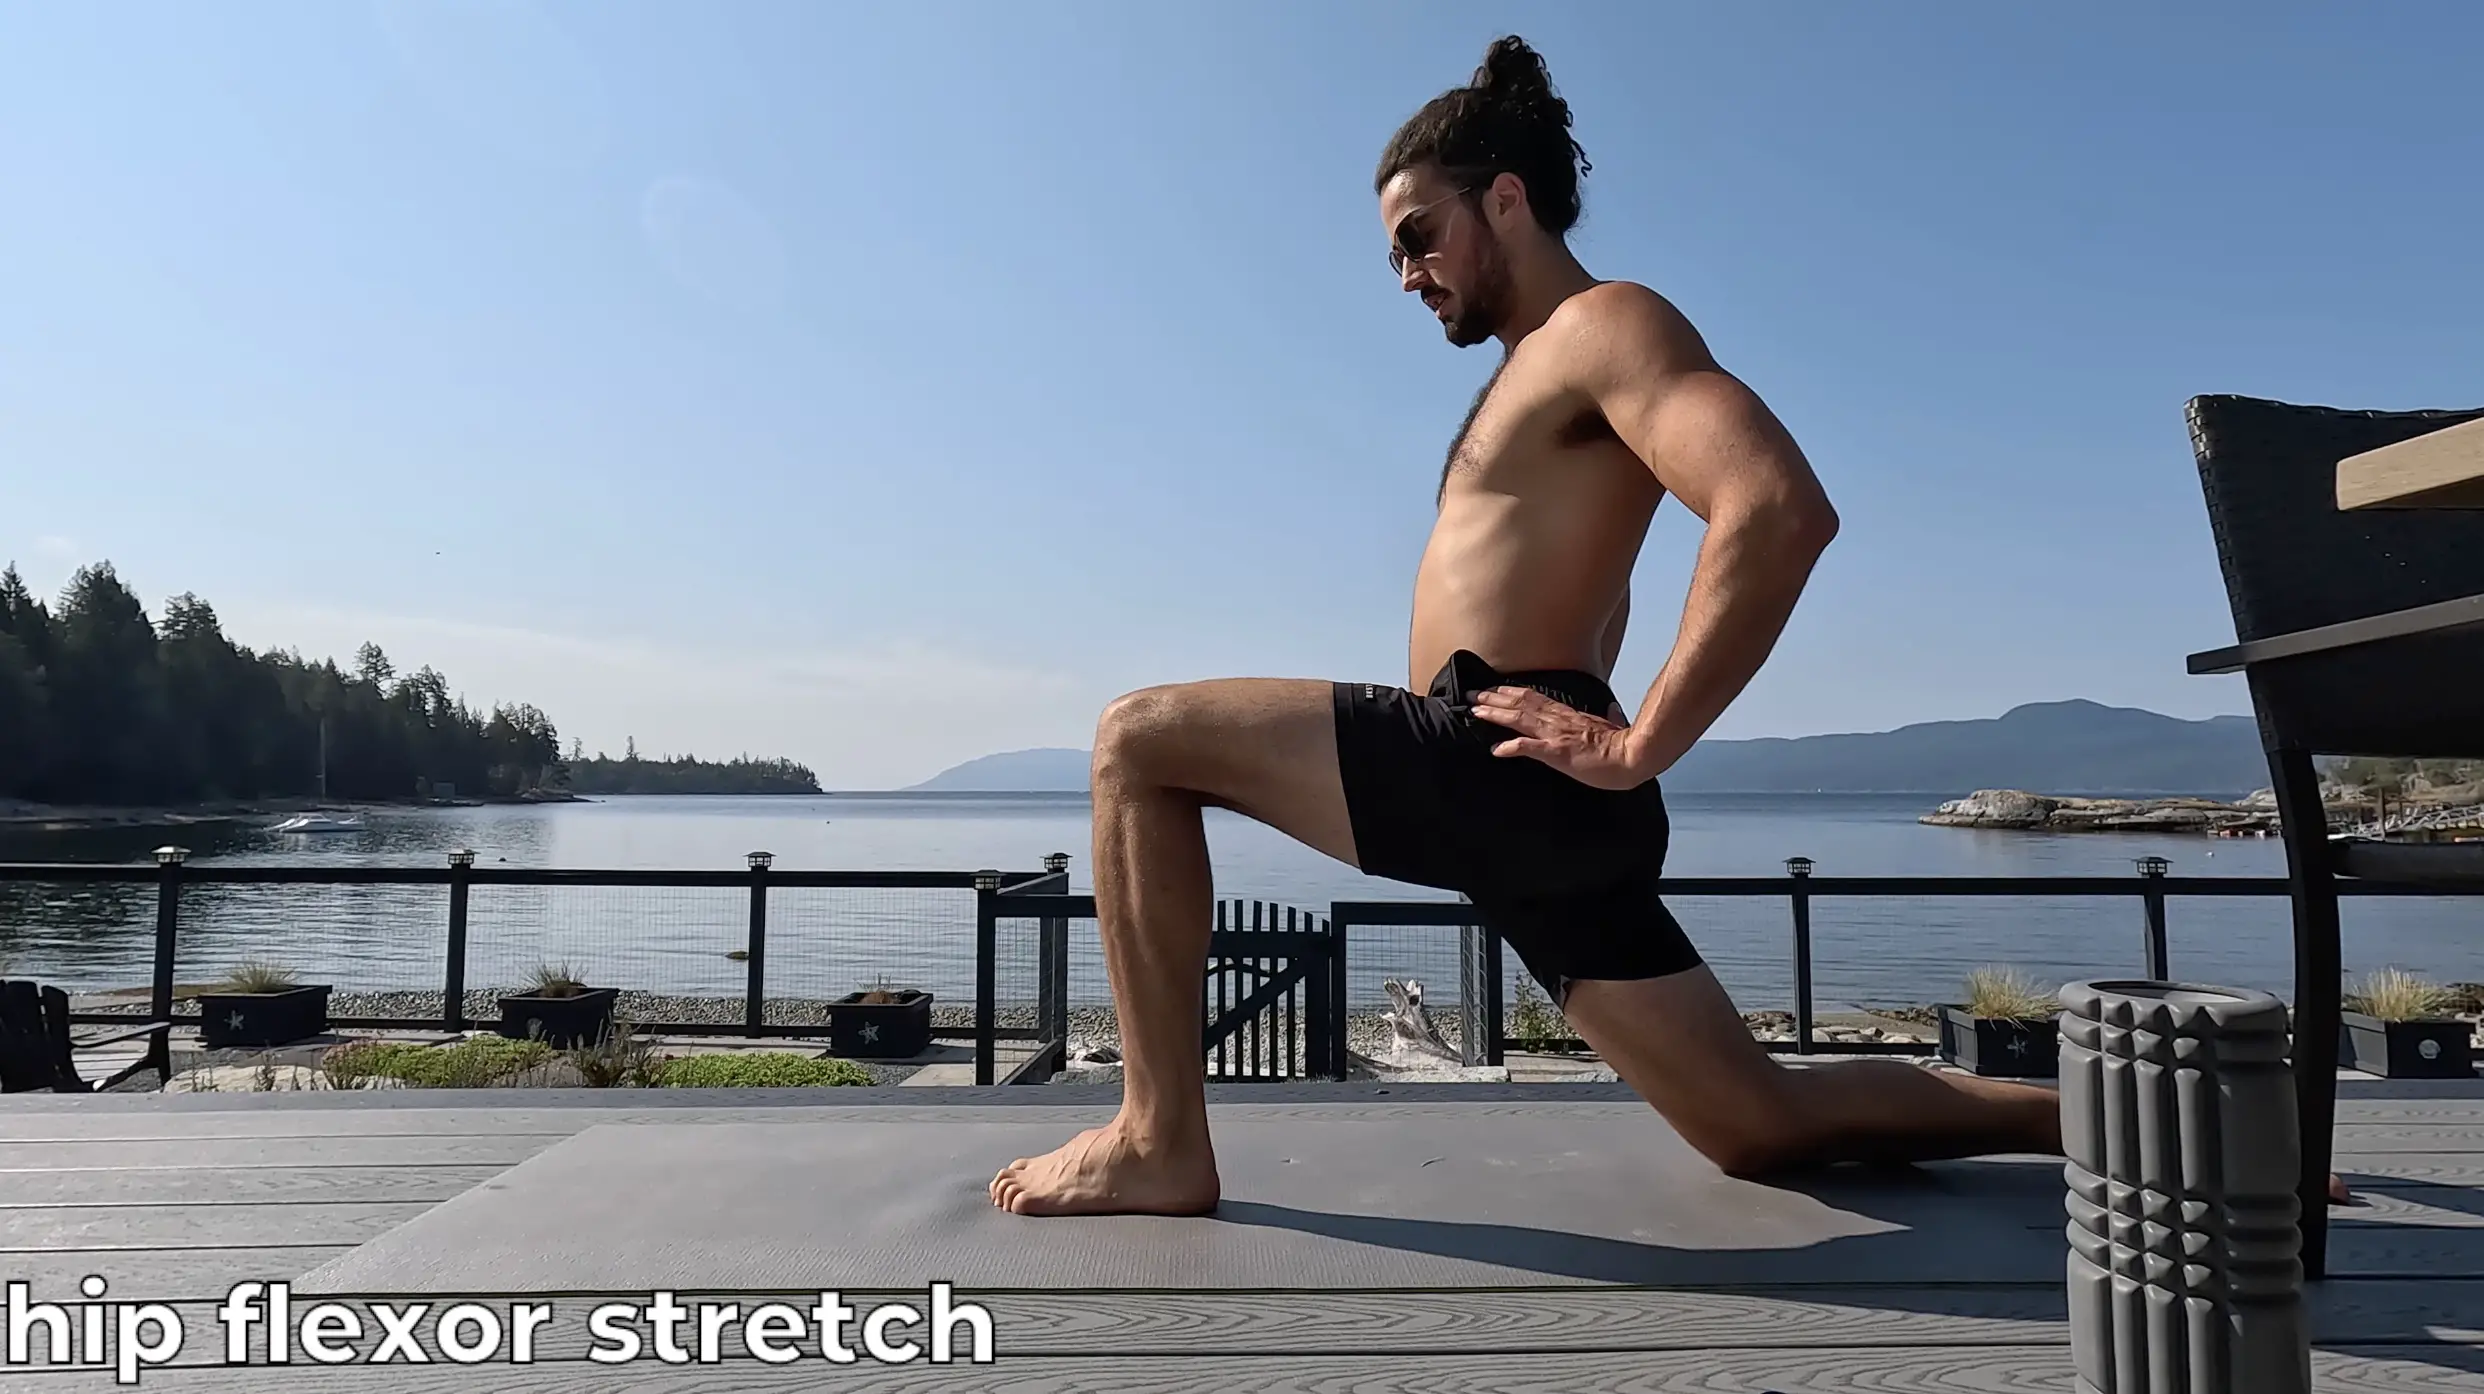 Hip Flexor Stretch - a great exercise to fix knee pain, strengthen muscles and increase flexibility